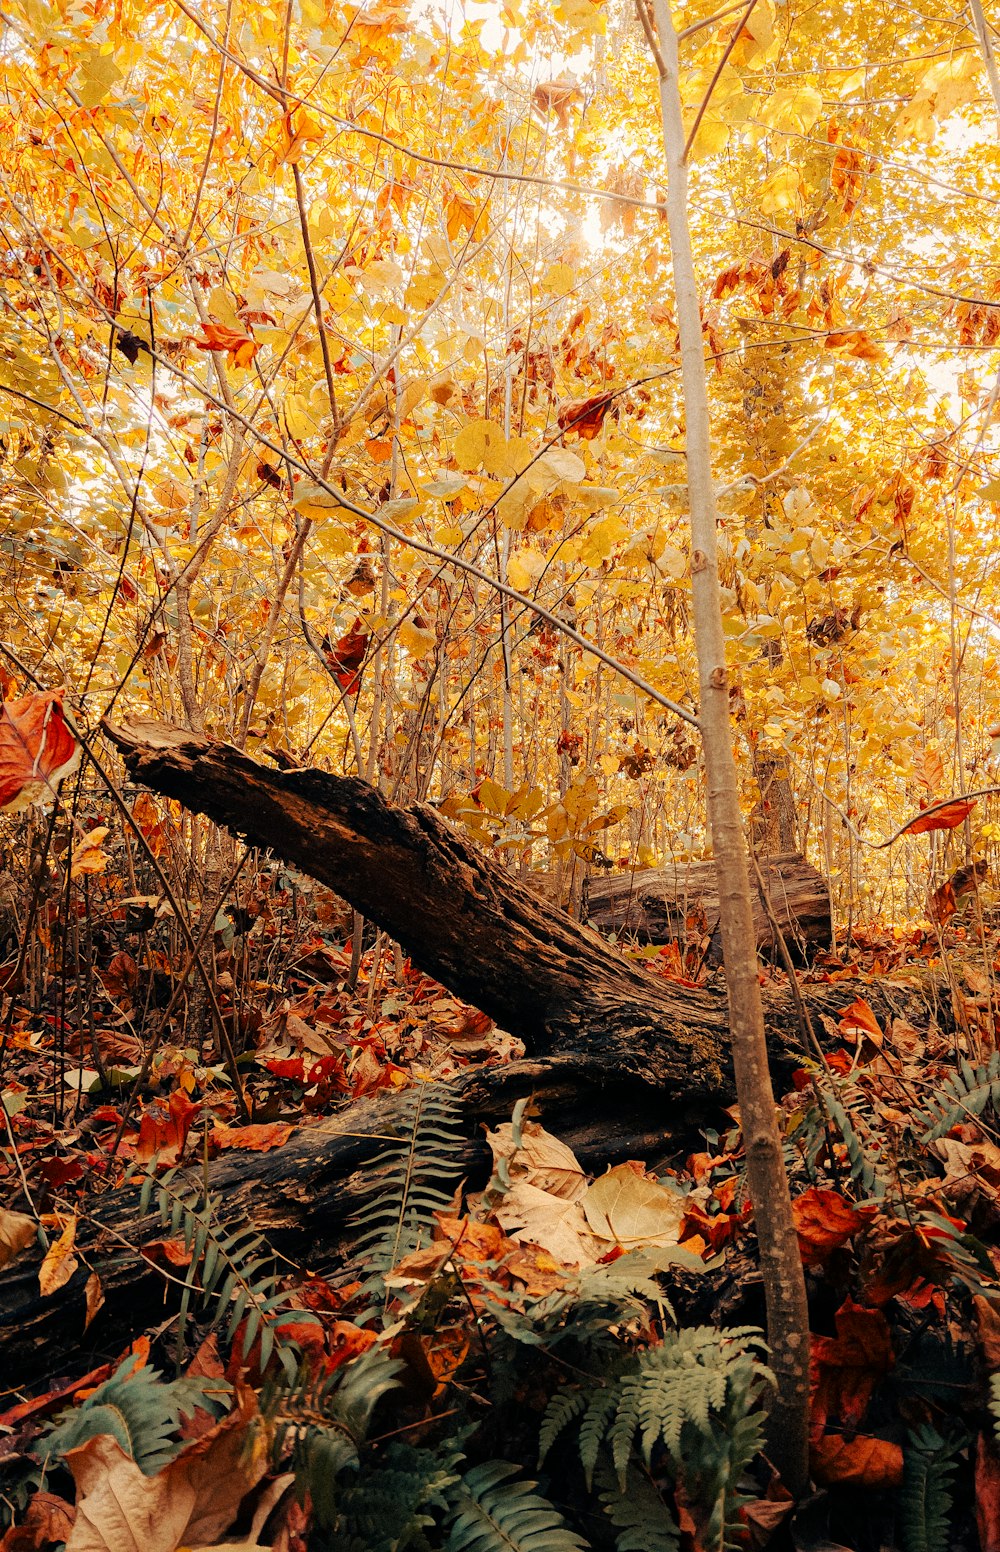 a fallen tree in a forest filled with lots of leaves